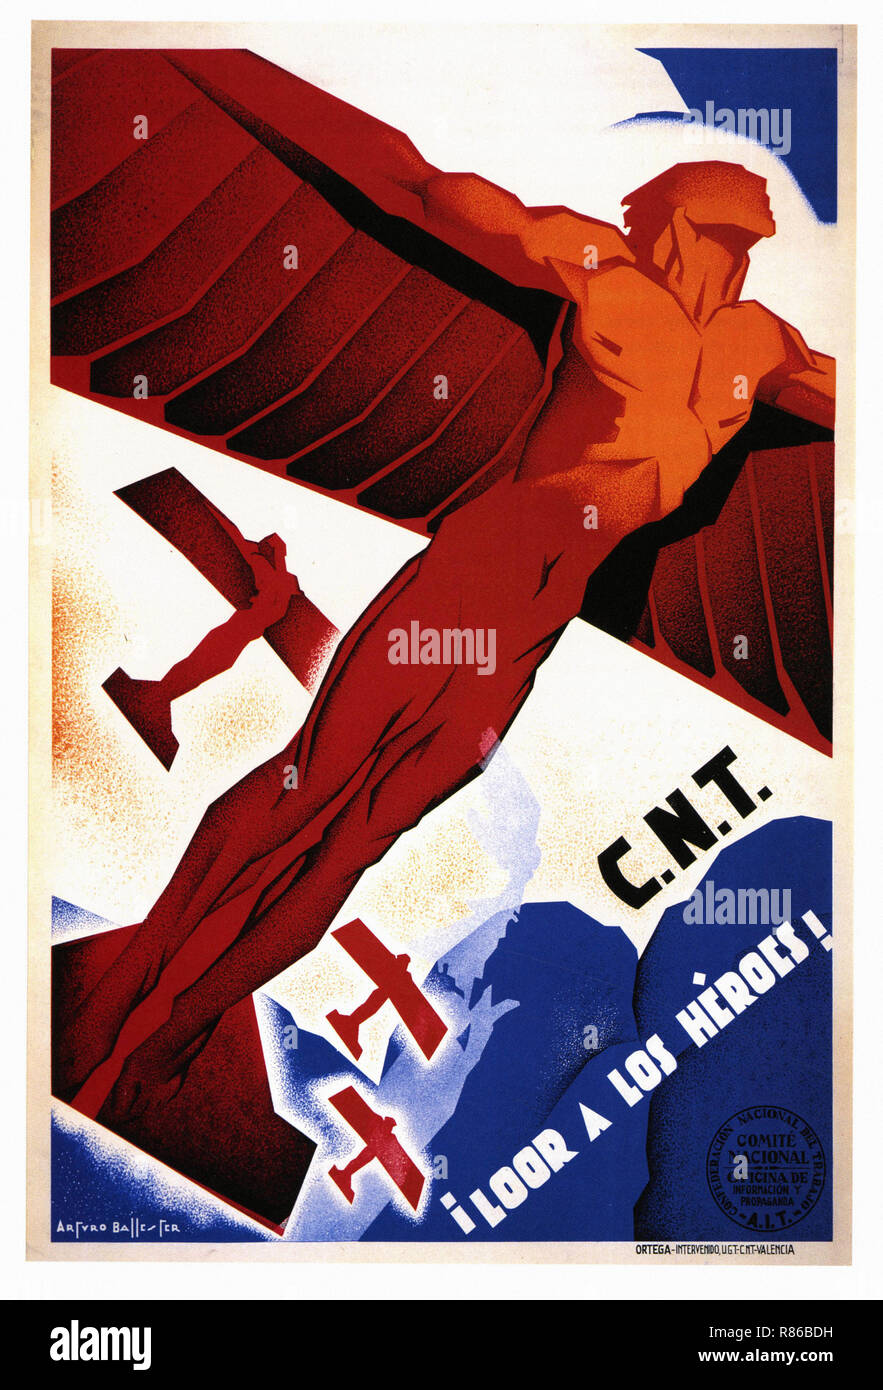 C.N.T Hail To The Heros - Vintage advertising poster Stock Photo